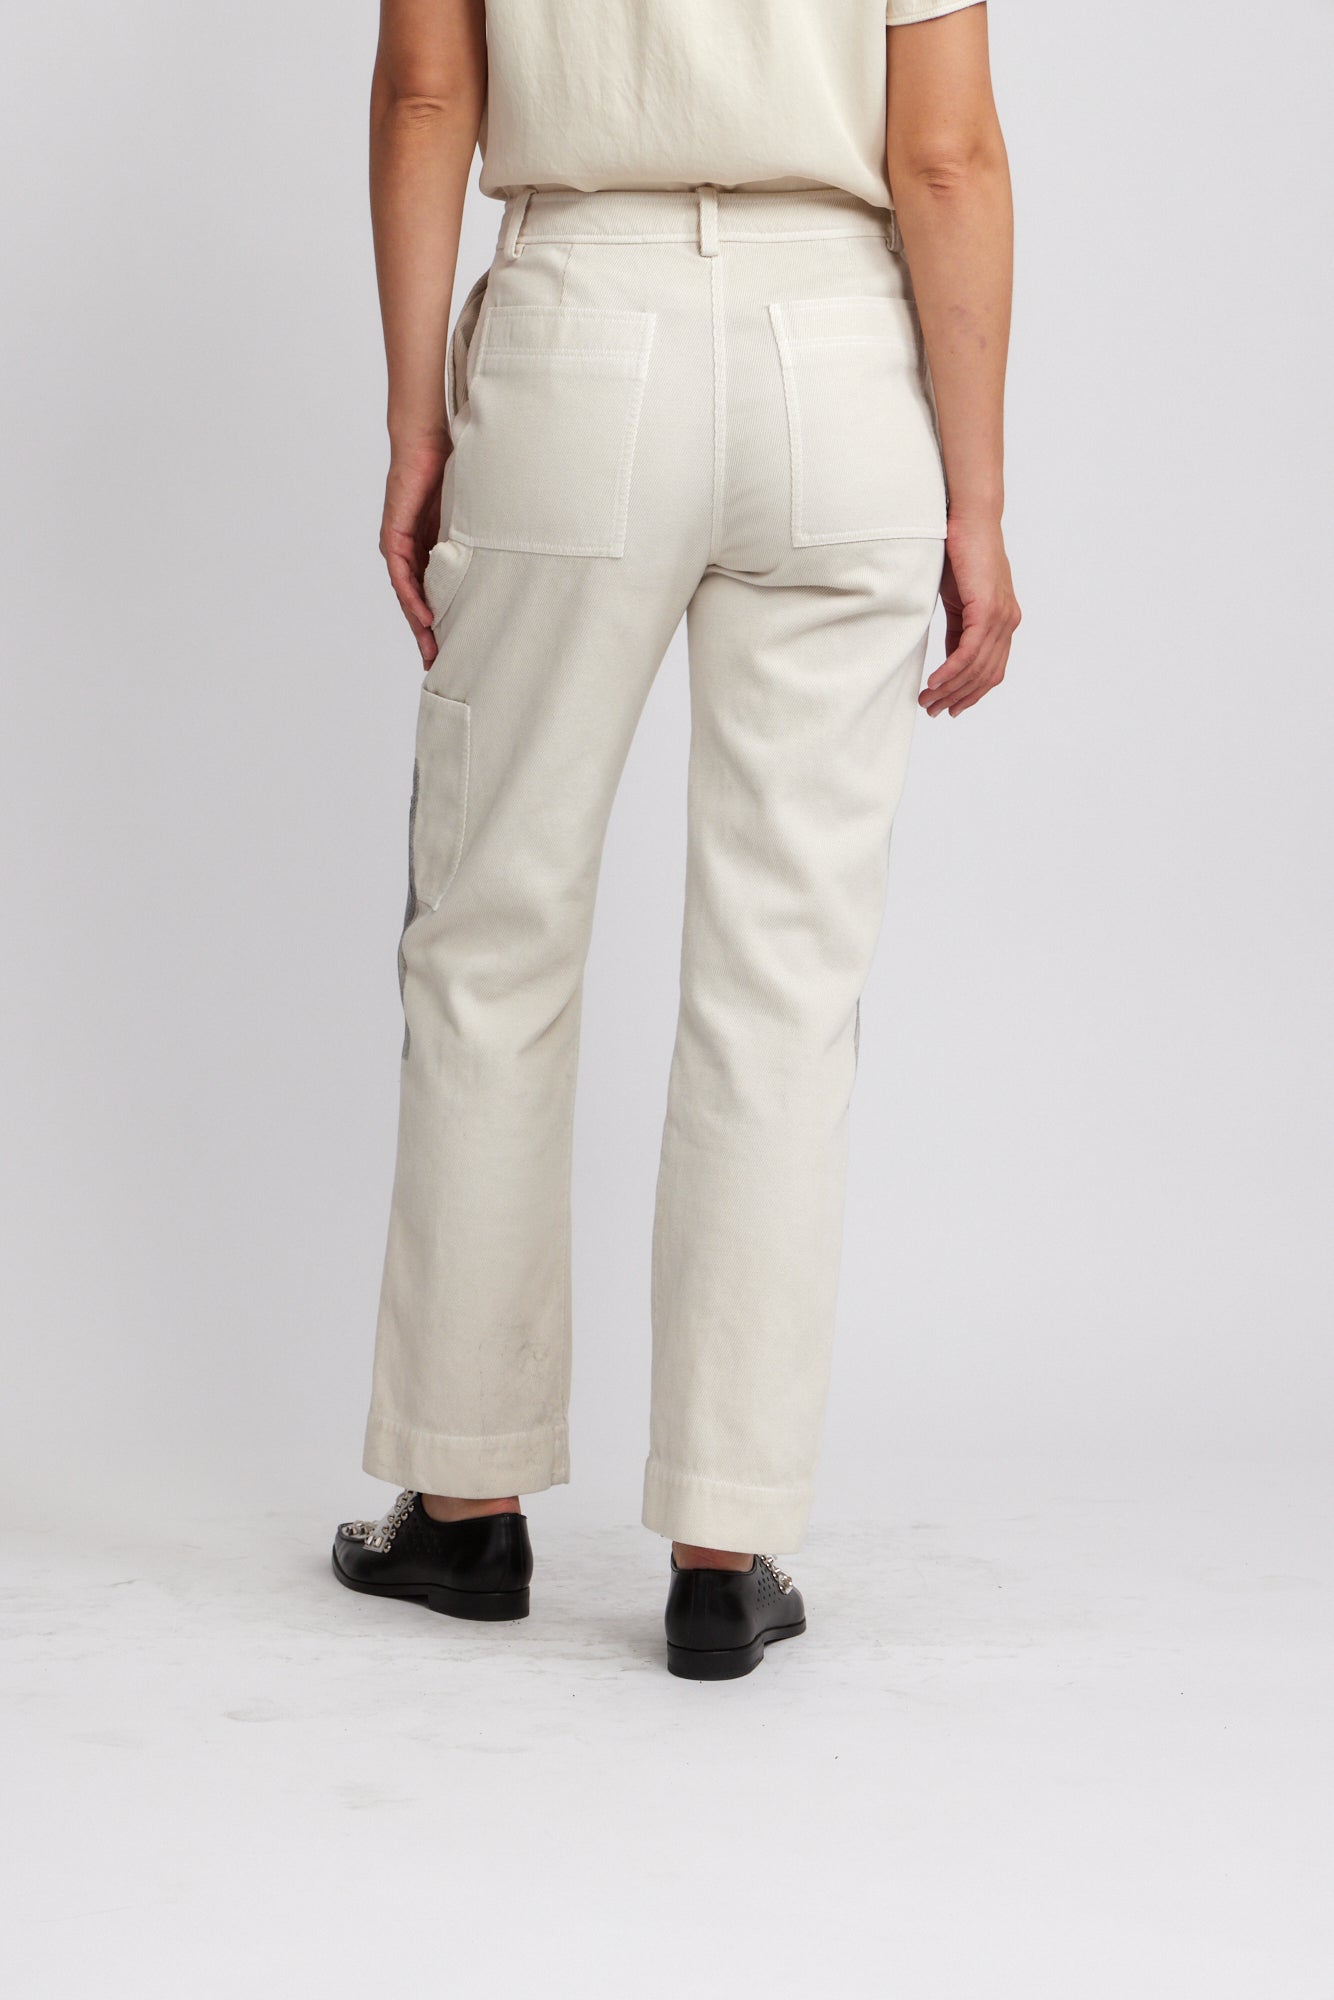 Ivory Black Paint Faille Work Pant Back Close-Up View